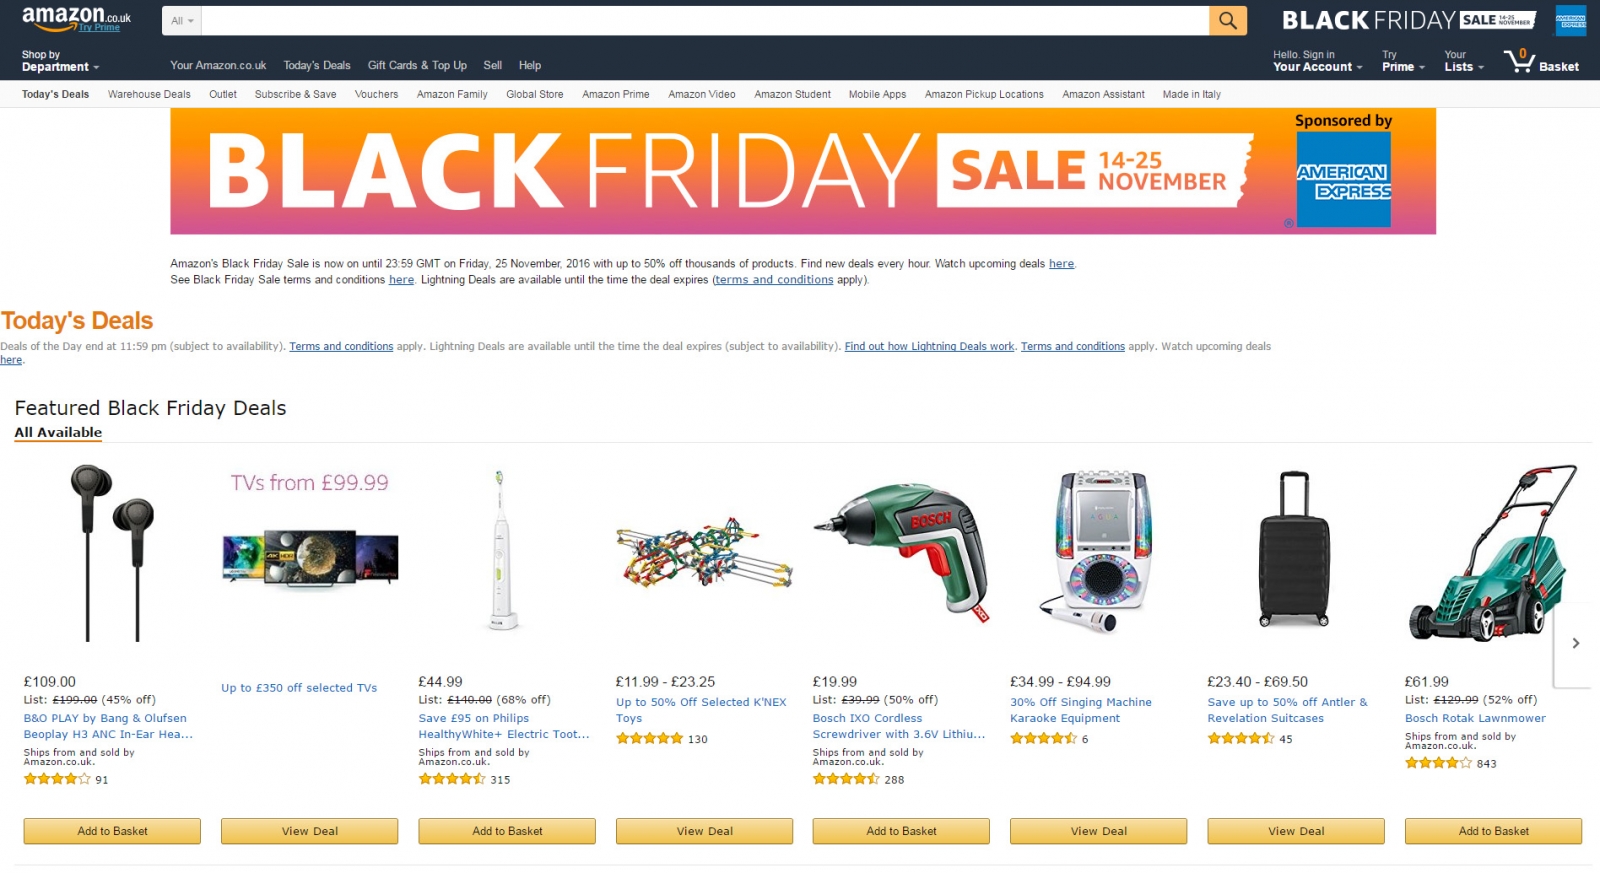 Amazon Black Friday Sales 2016: Here are the best Day One deals